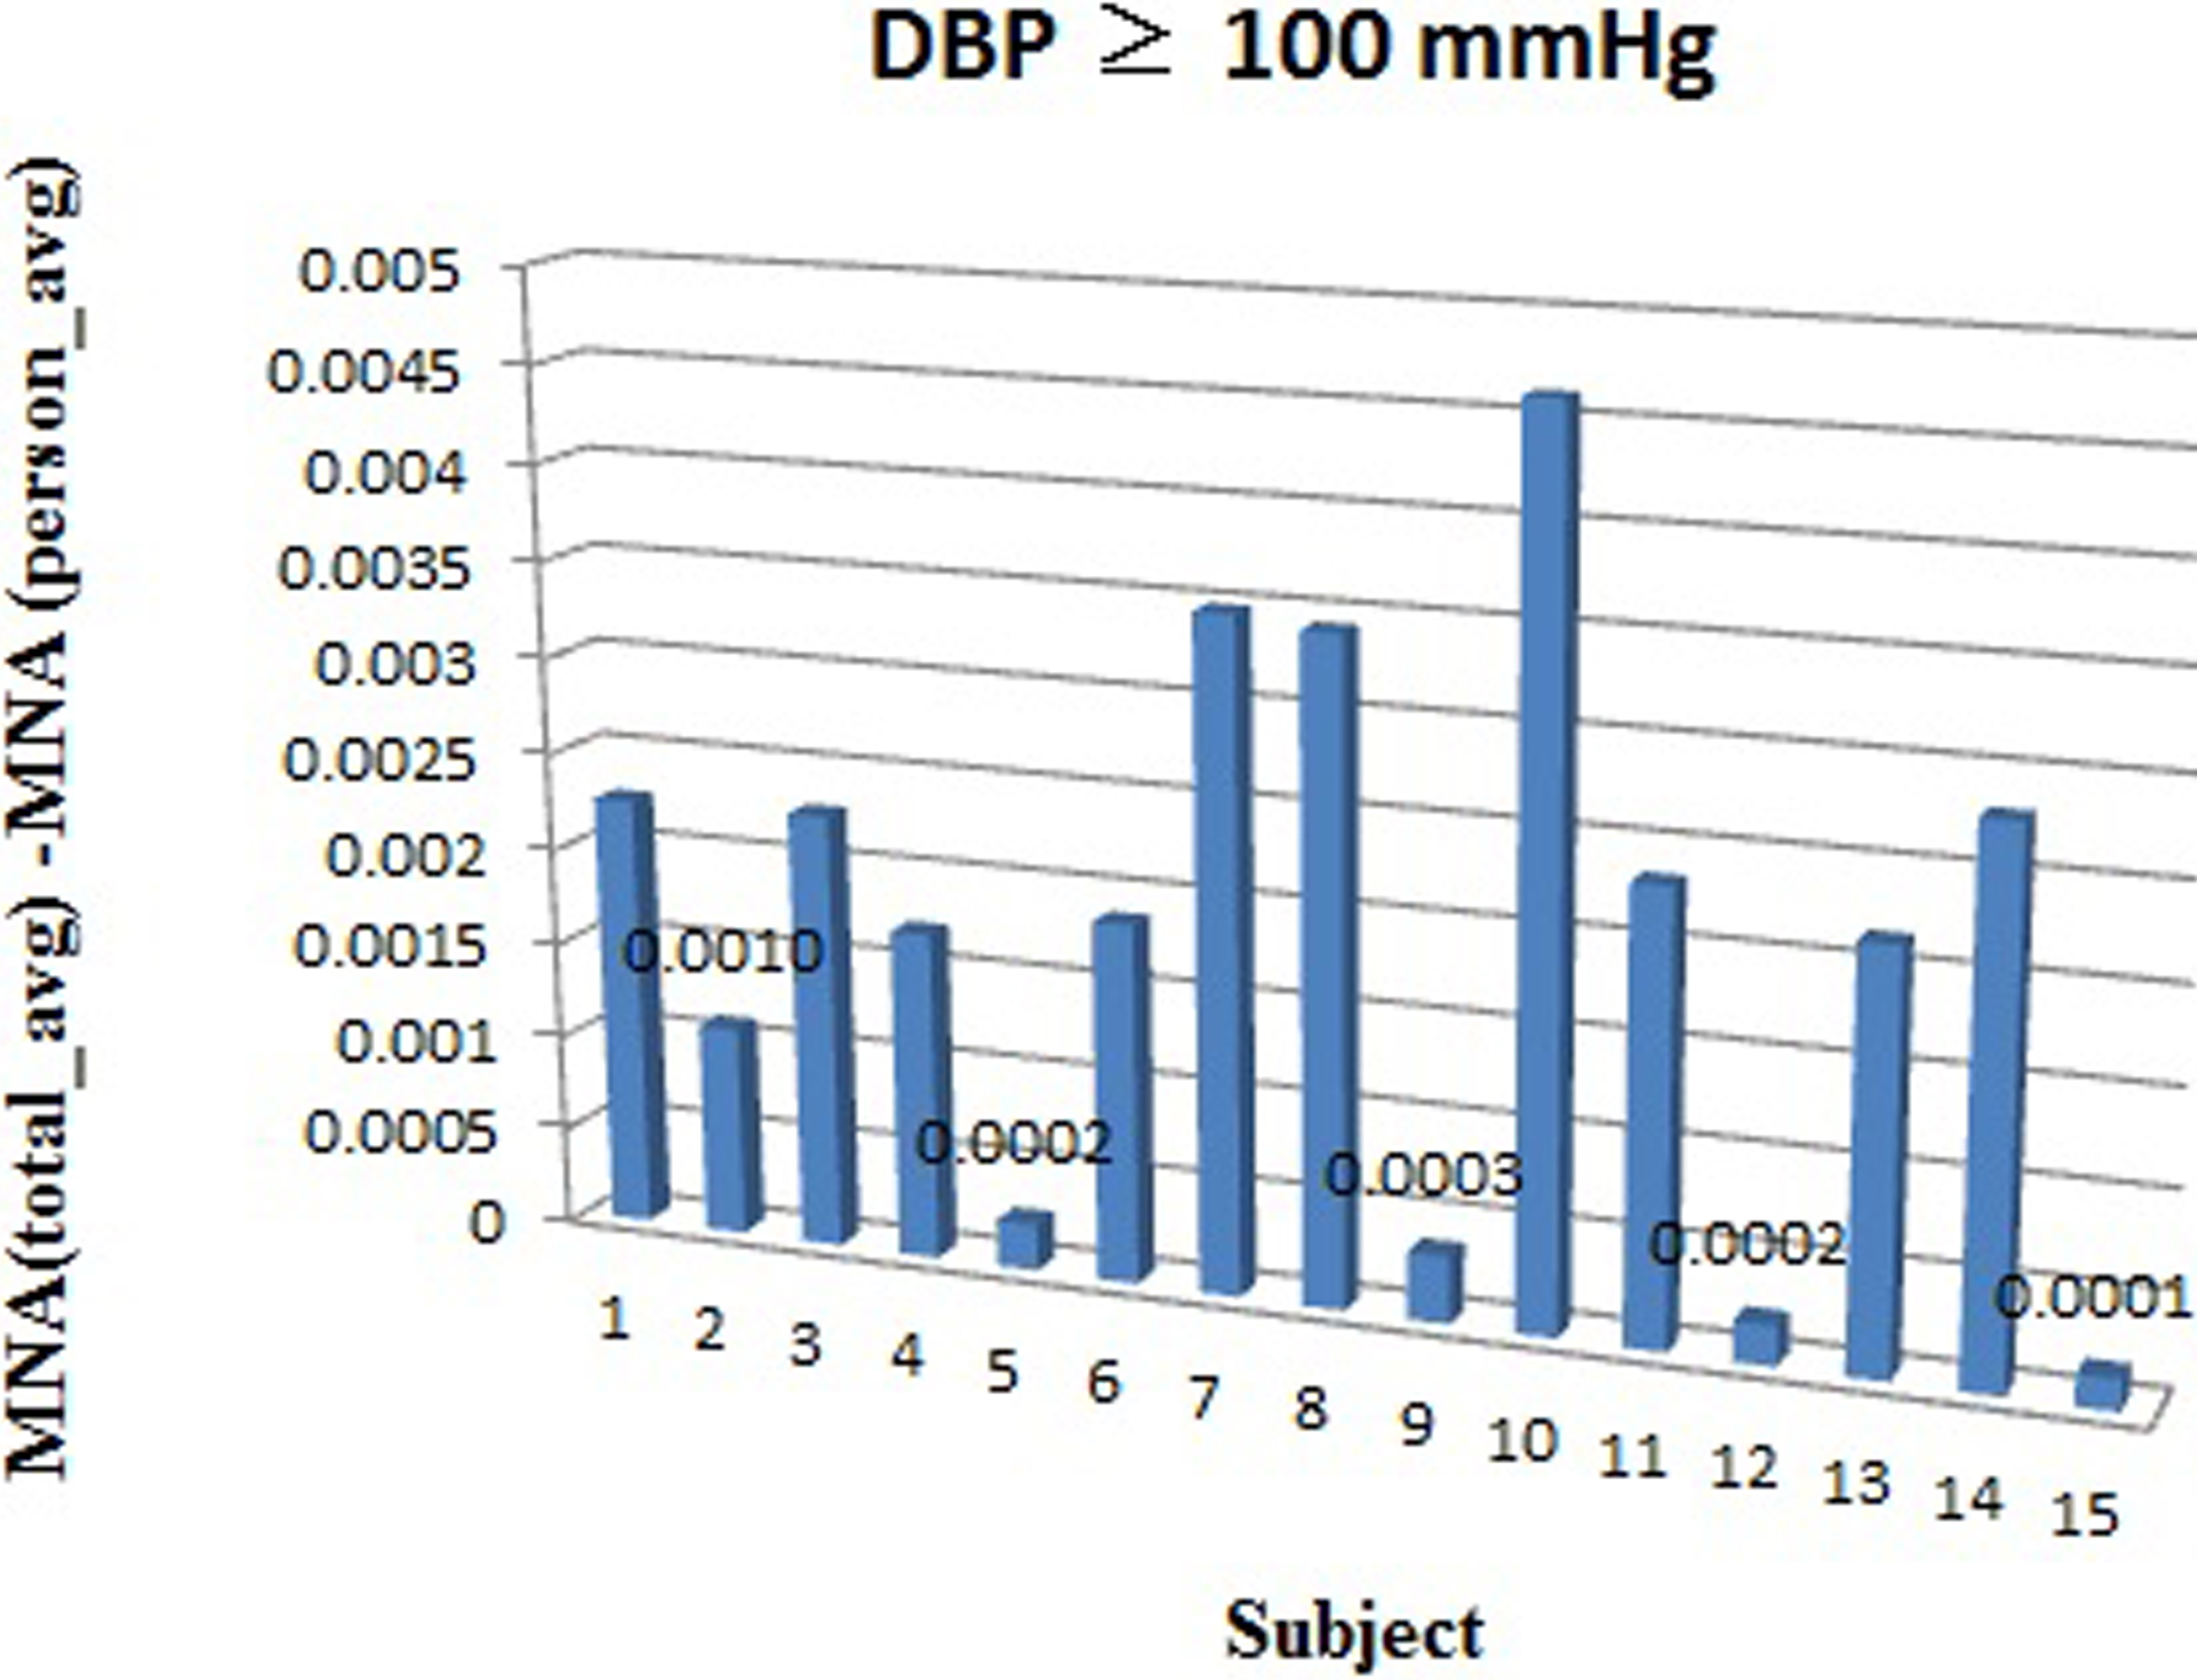 Distribution of BP in subjects with a DBP ⩾ 100 mmHg.